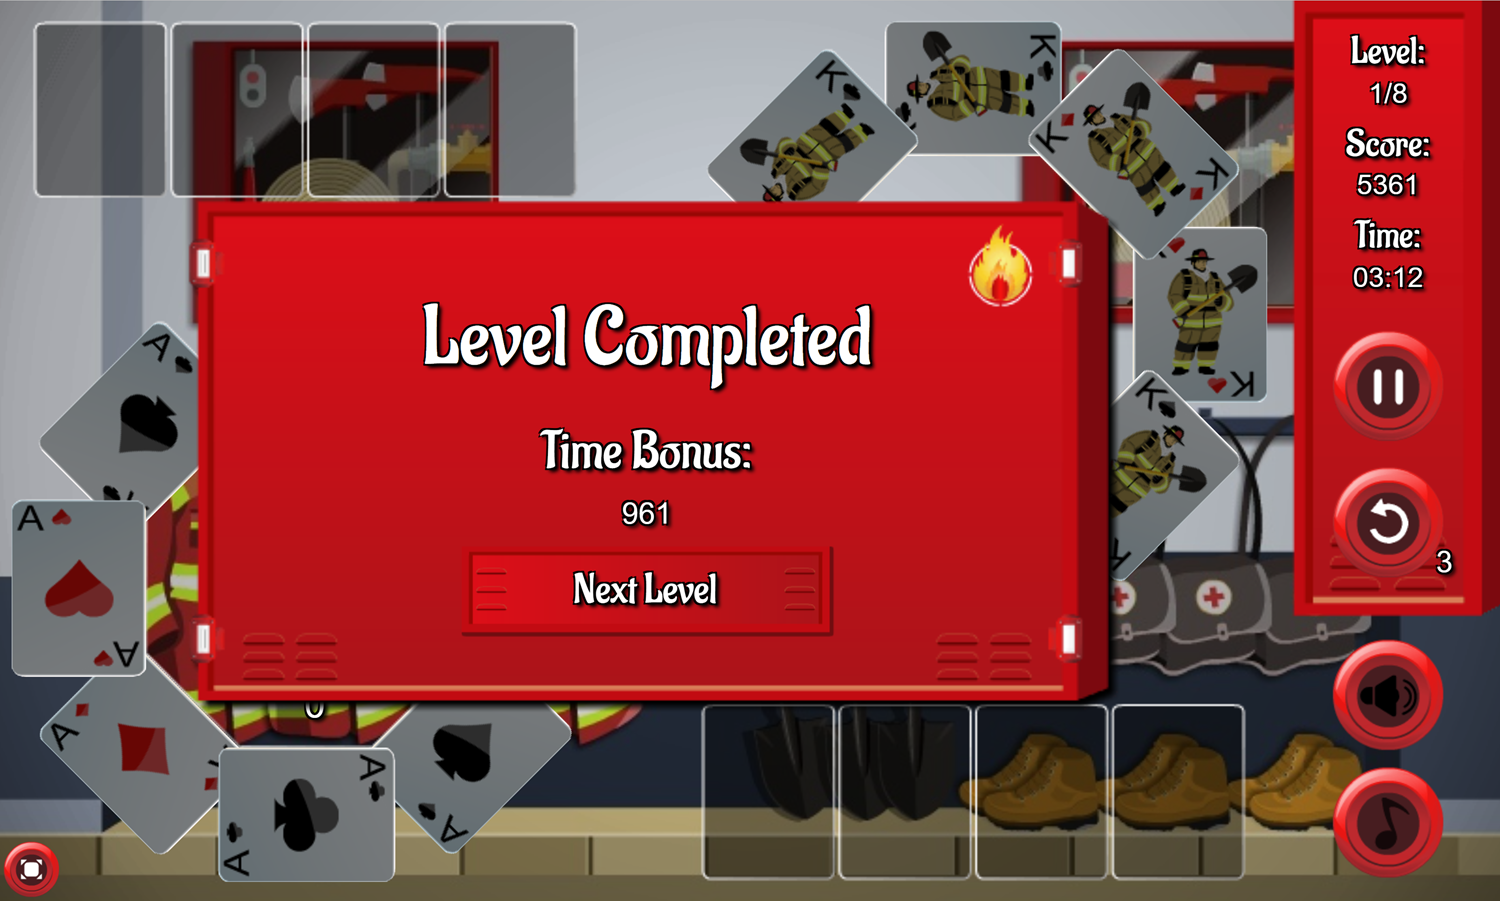 Firemen Solitaire Game Level Completed Screen Screenshot.